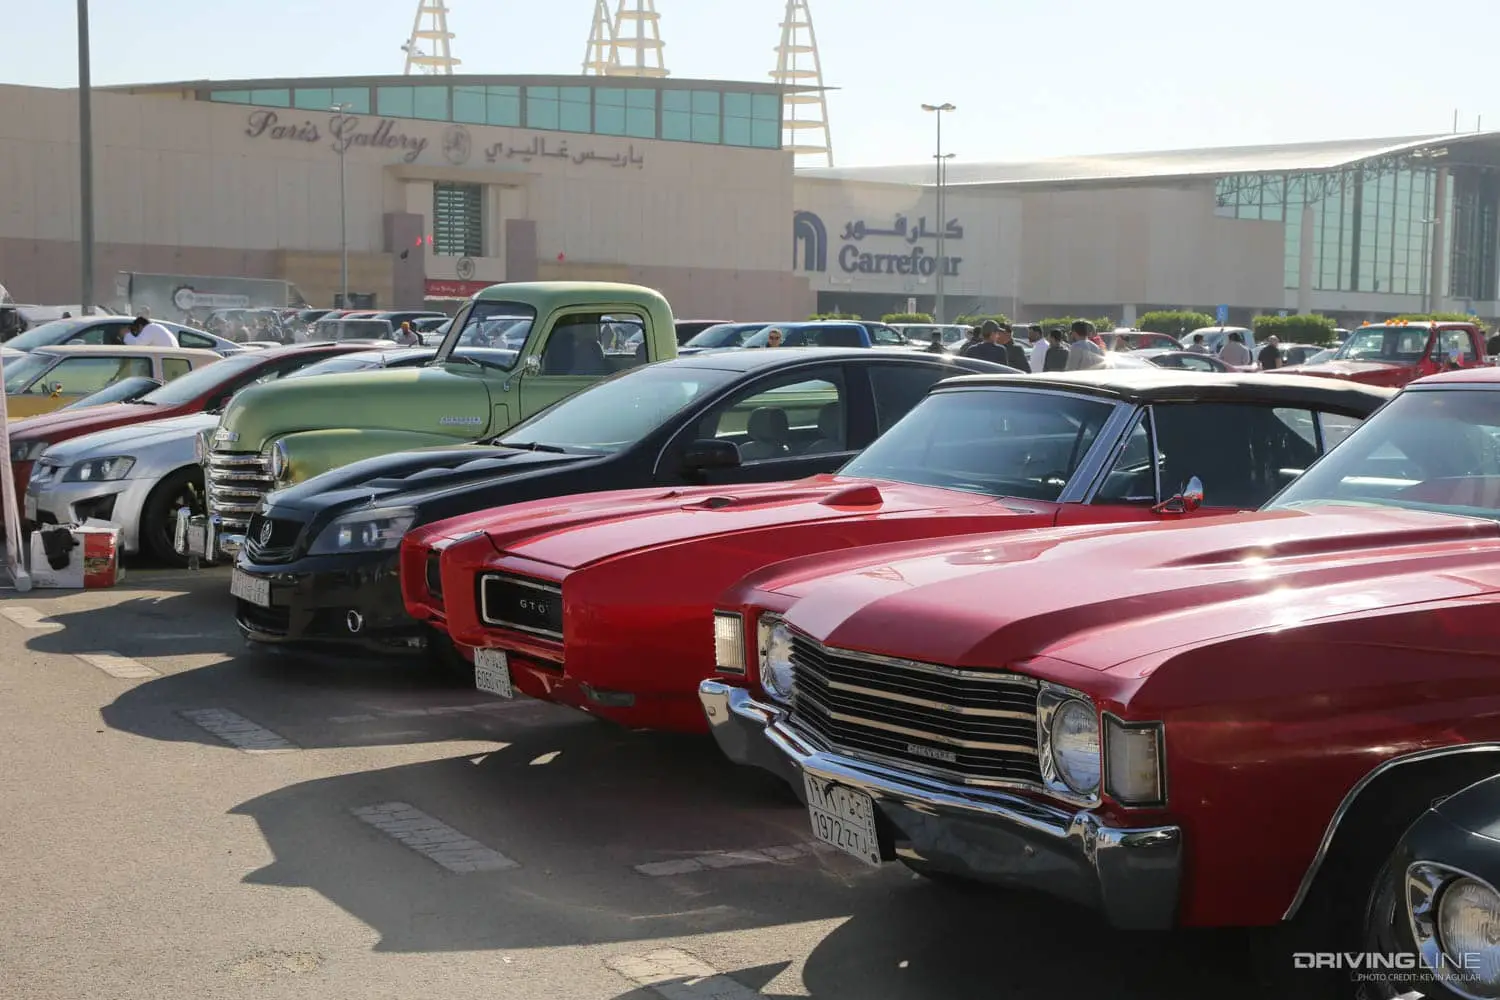 Discover the Perfect Blend of Classic Cars and Coffee